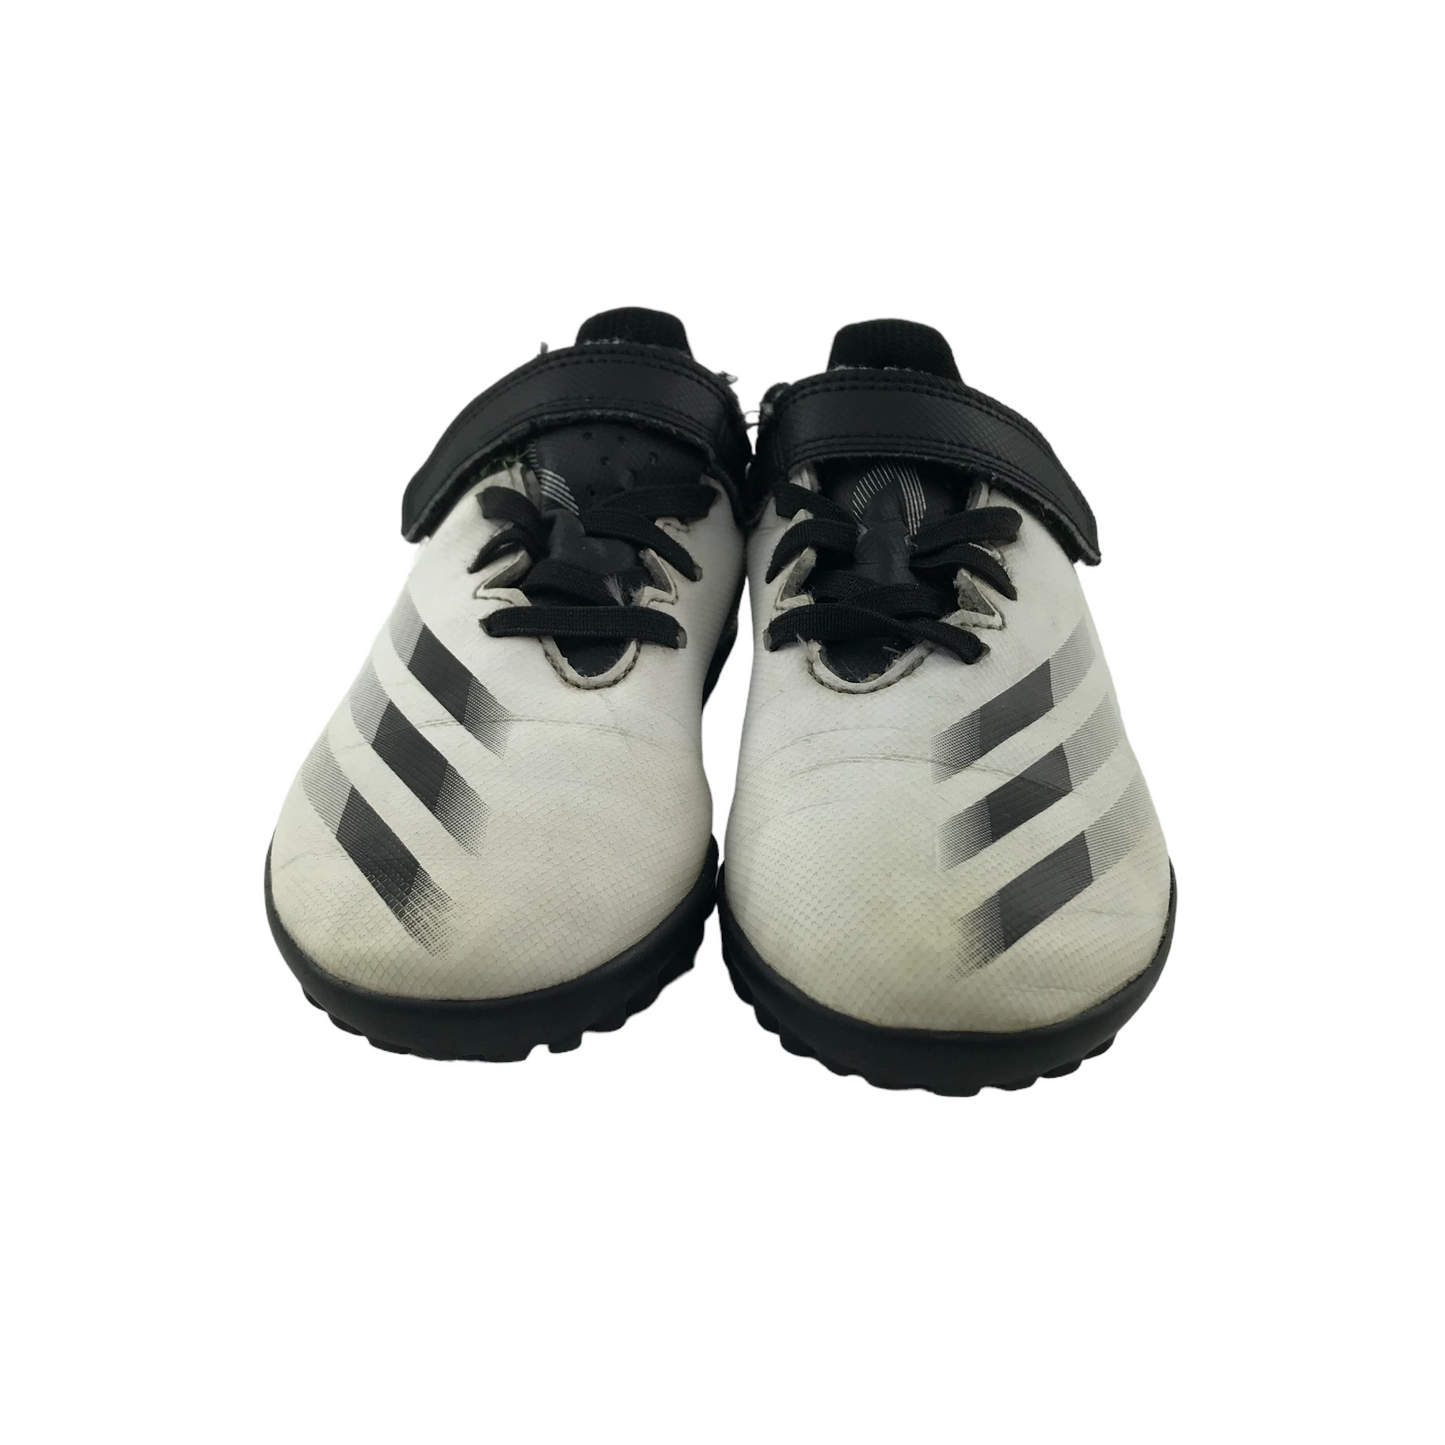 Adidas Football Boots Shoe Size 12 Junior Black and White Astroturf